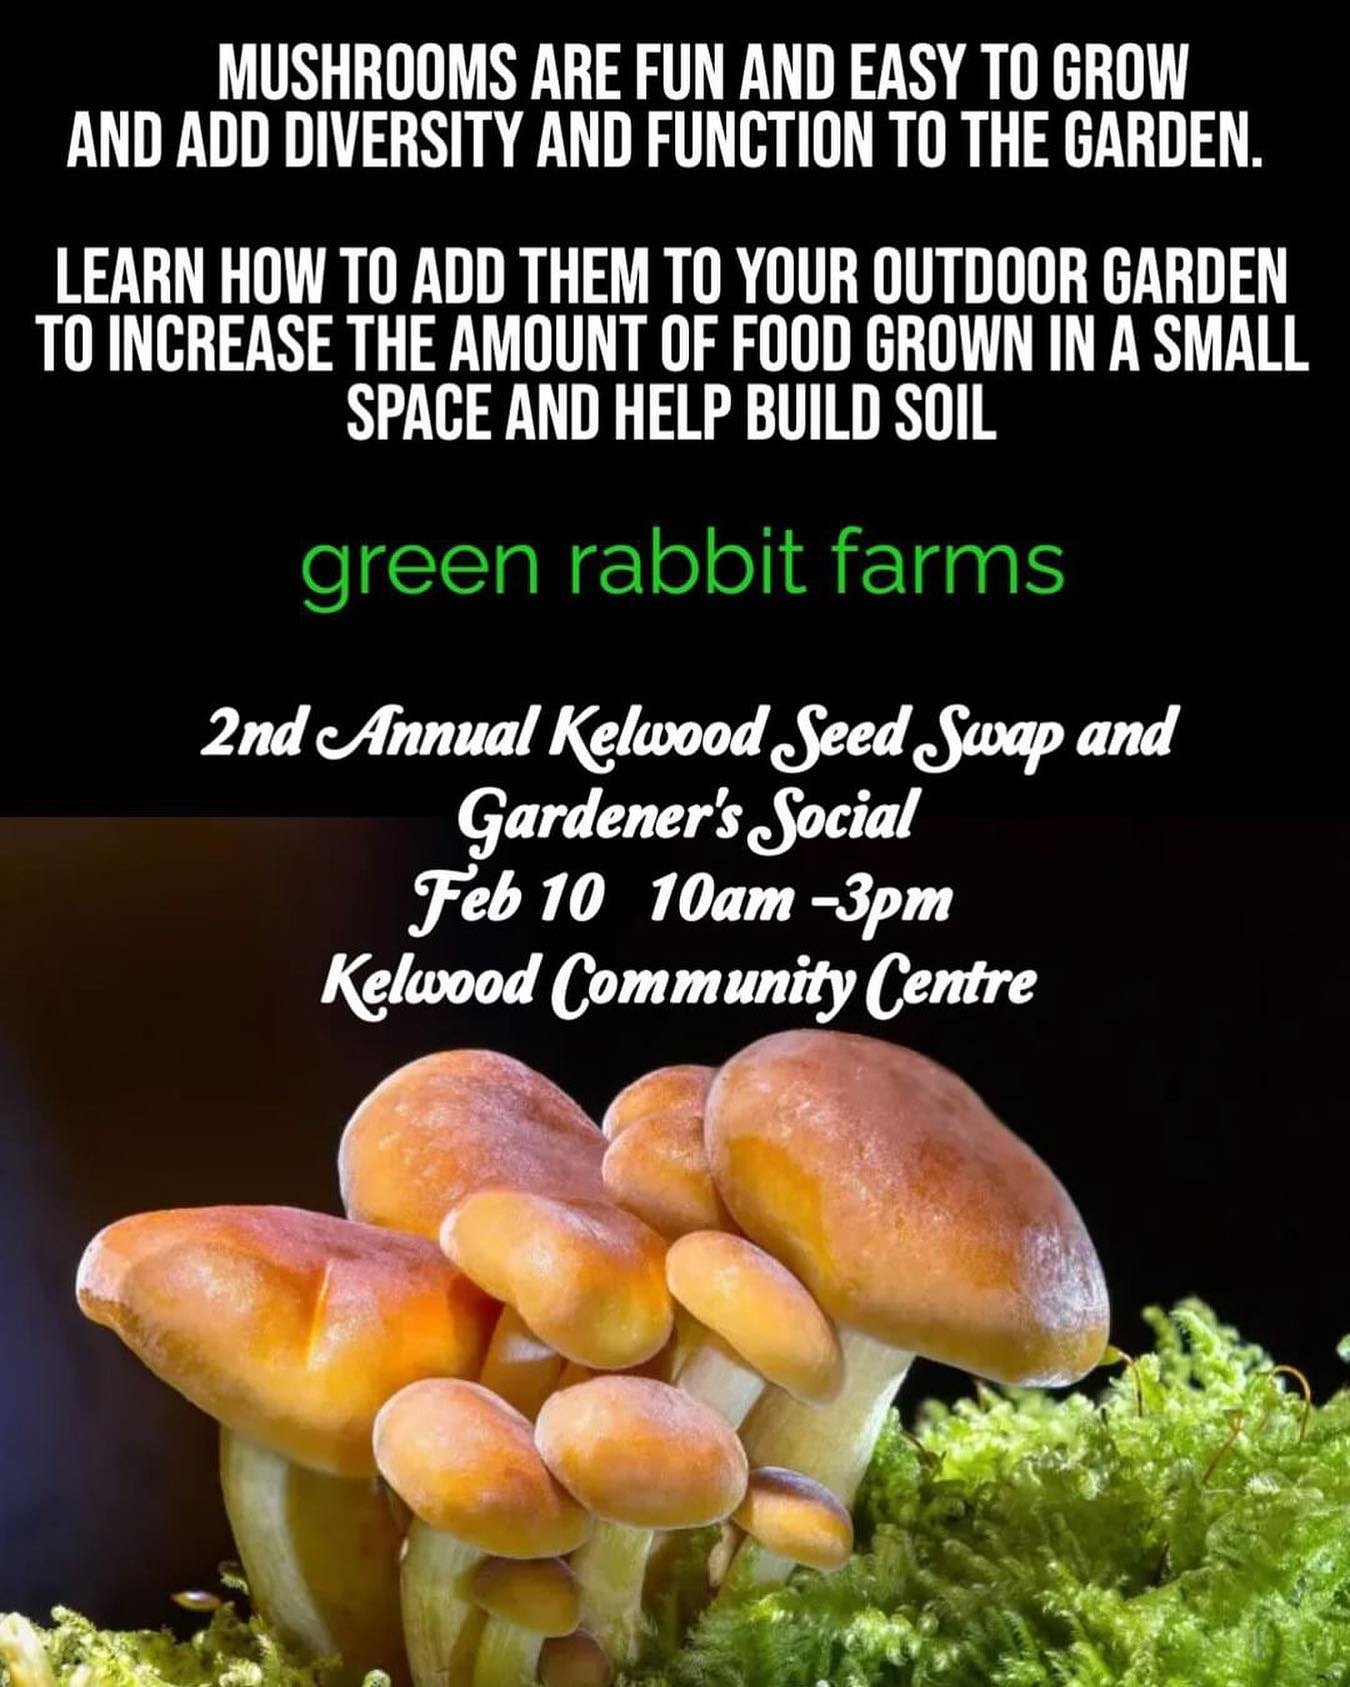 We will be in Kelwood next weekend for a seedy fun time! Come learn how to add mushrooms to your garden and stay for a beautiful community potluck afterwards. #seedysaturday #community #manitoba #kelwood